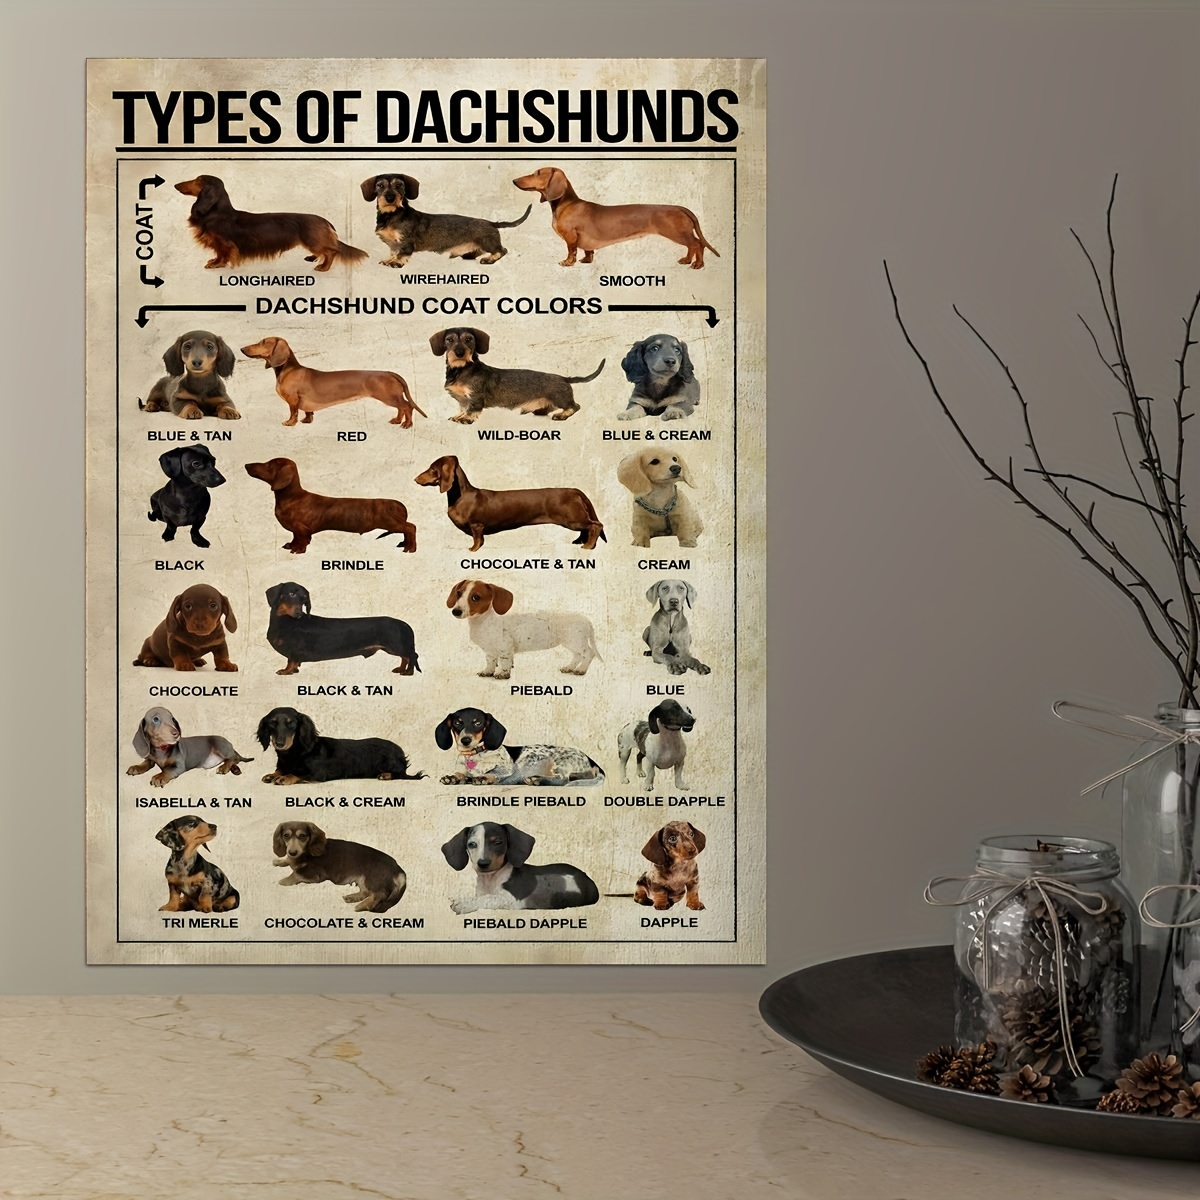 Dachshunds - Types, Knowledge, And Lover Poster - Canvas Wall Art ...